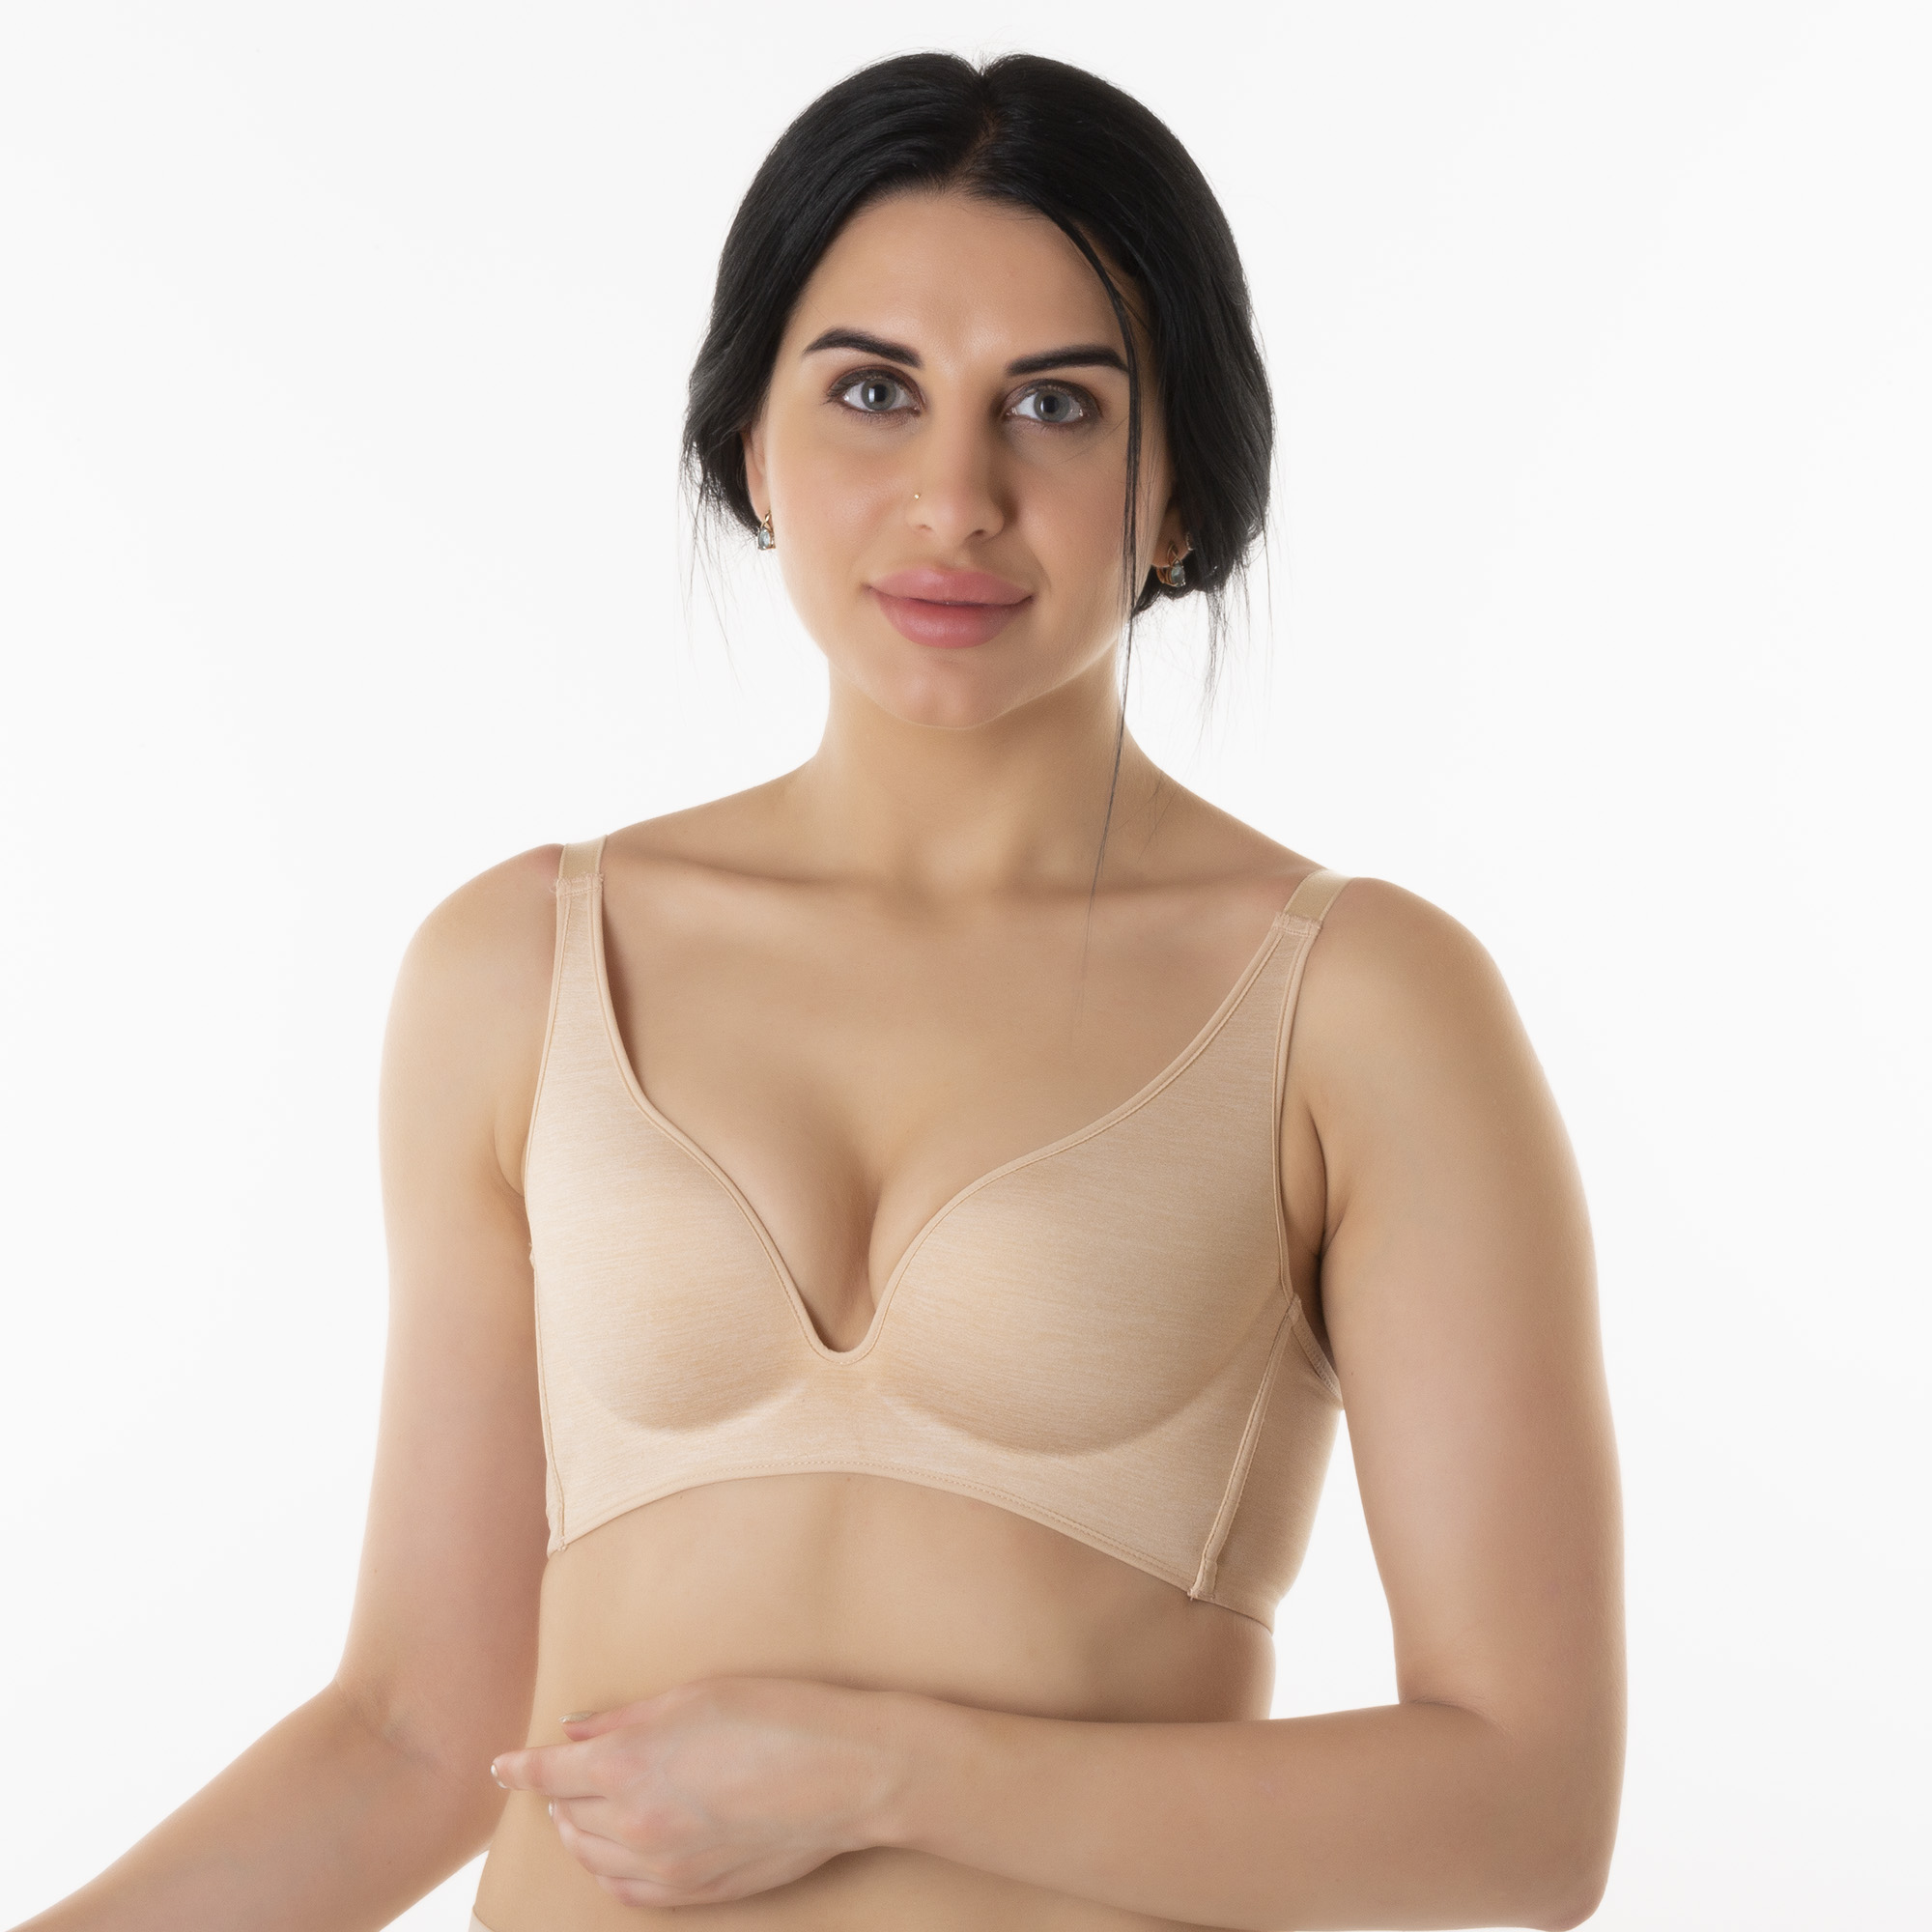 Lovebird Lingerie Padded Underwired Demi Cup Level-3 Multiway Push-up Bra